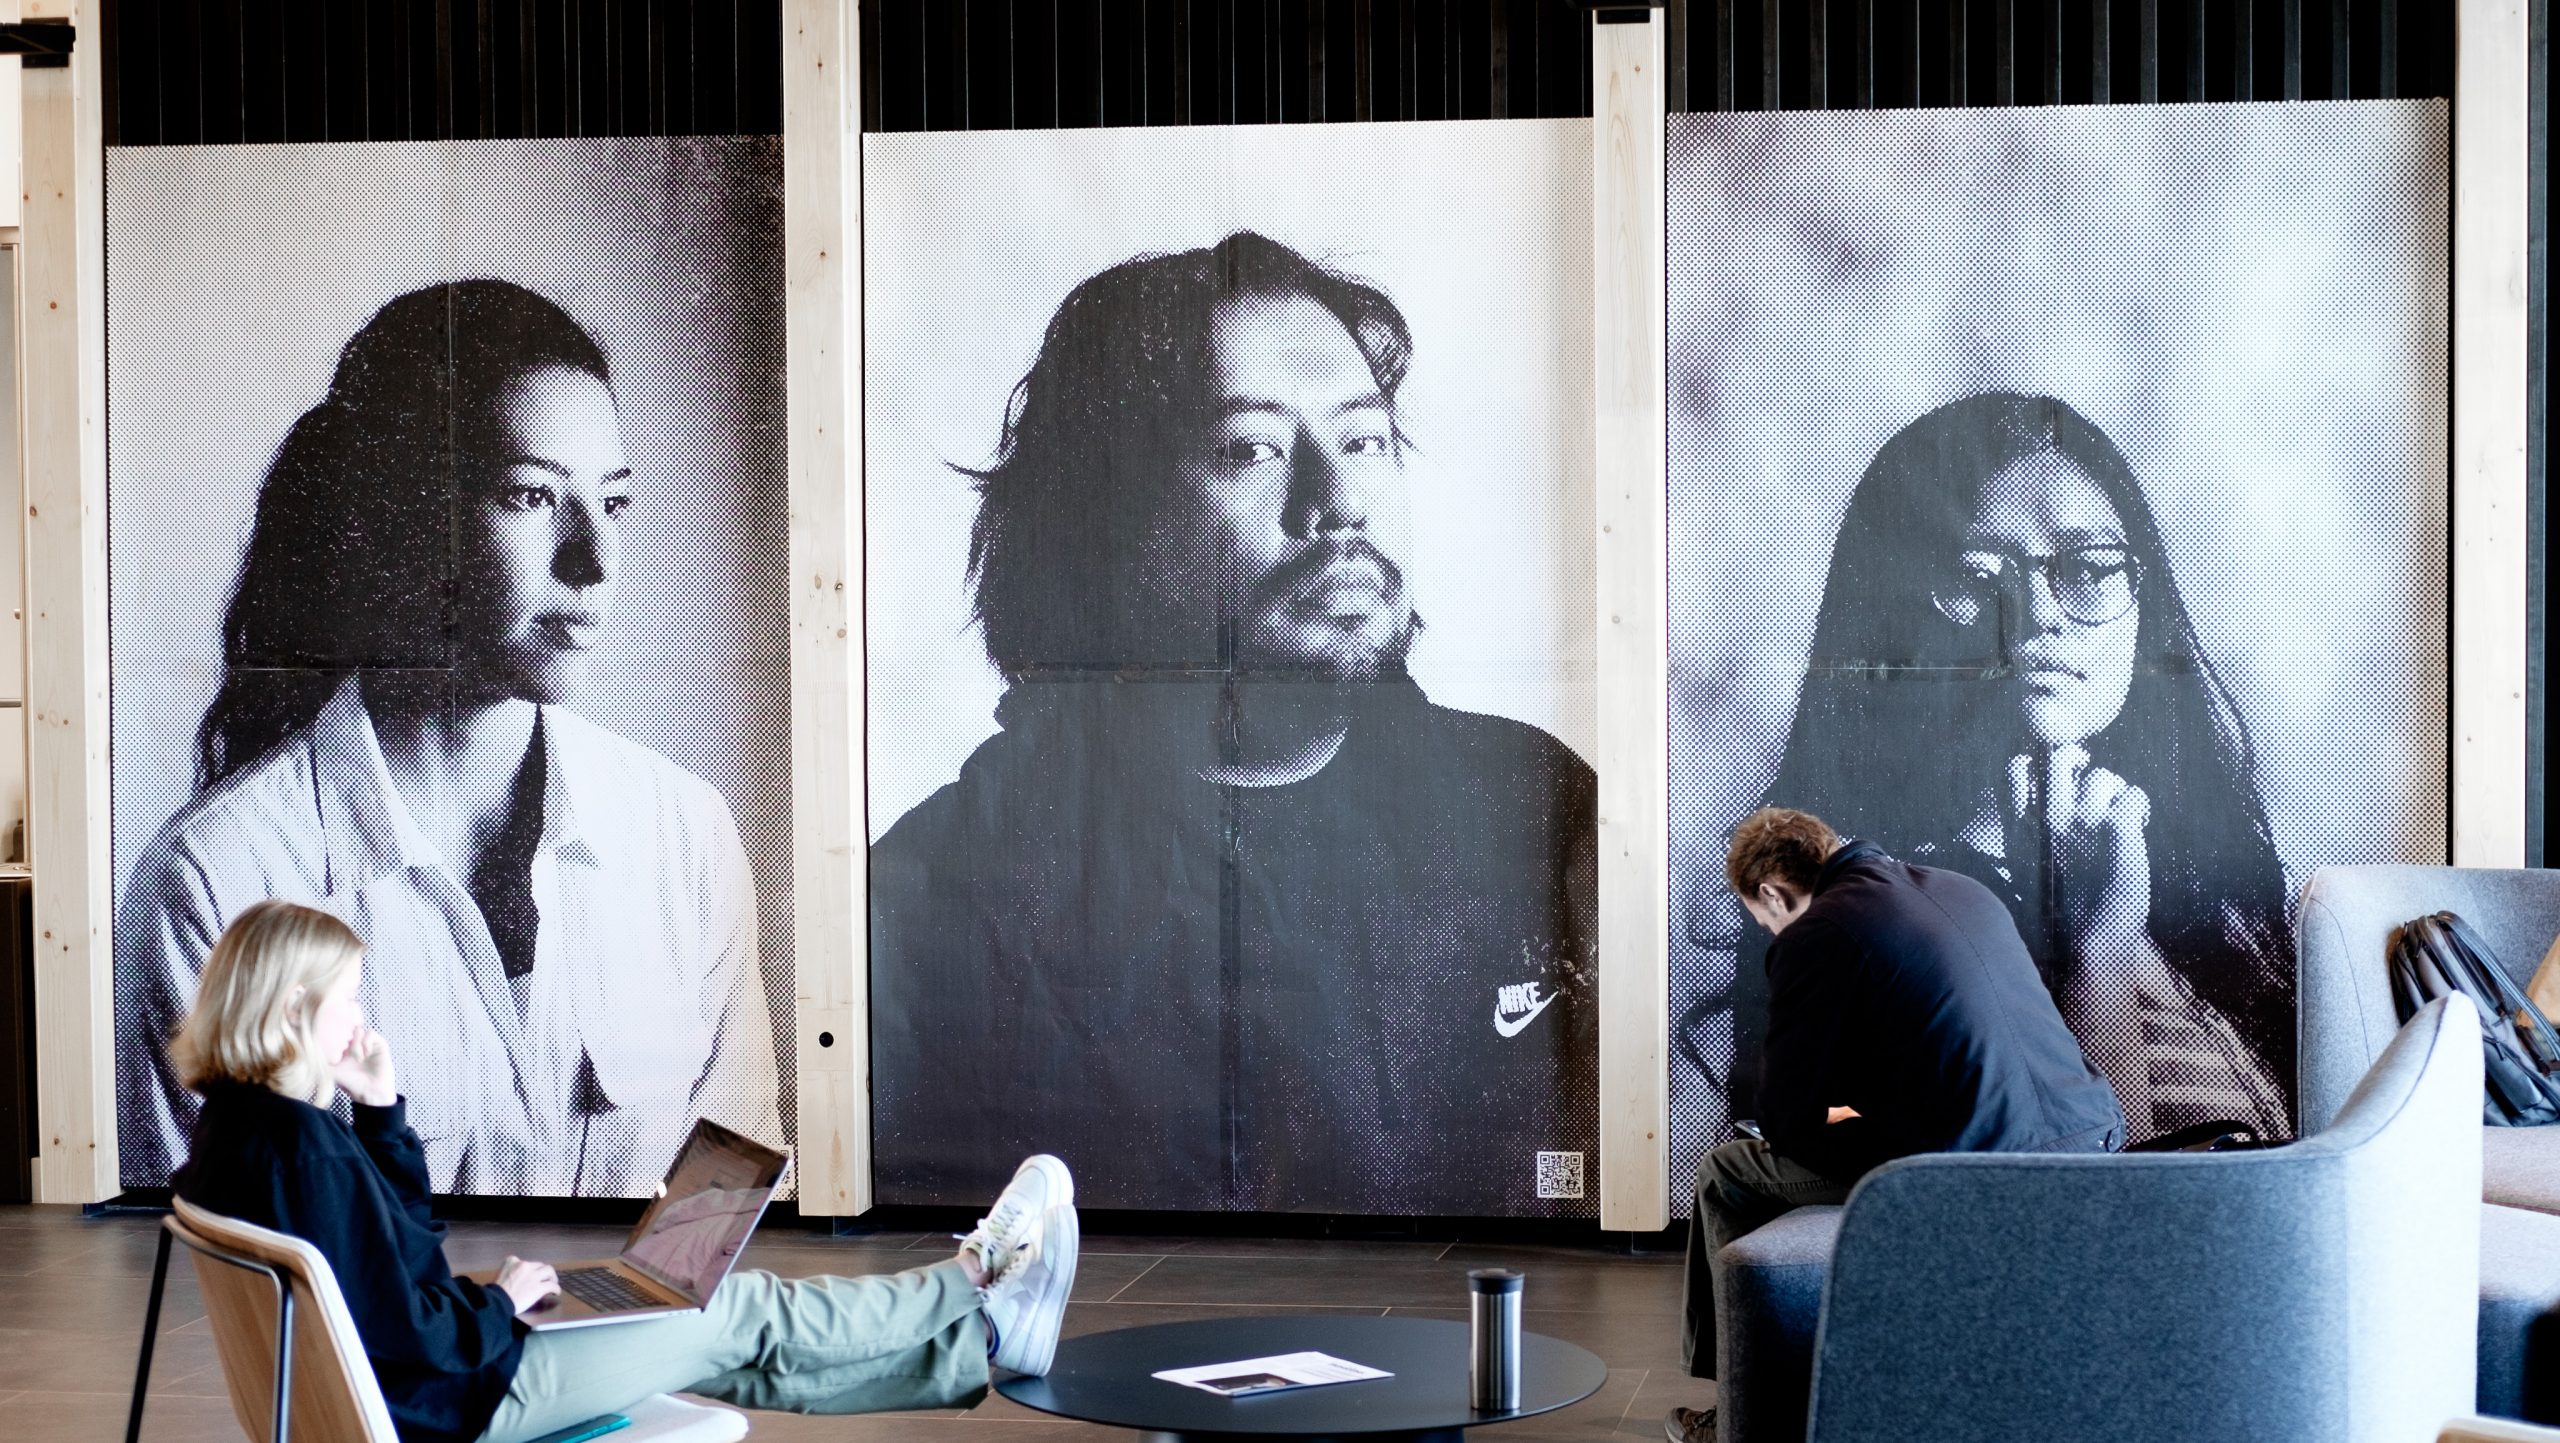 students in study space - portraits on the walls